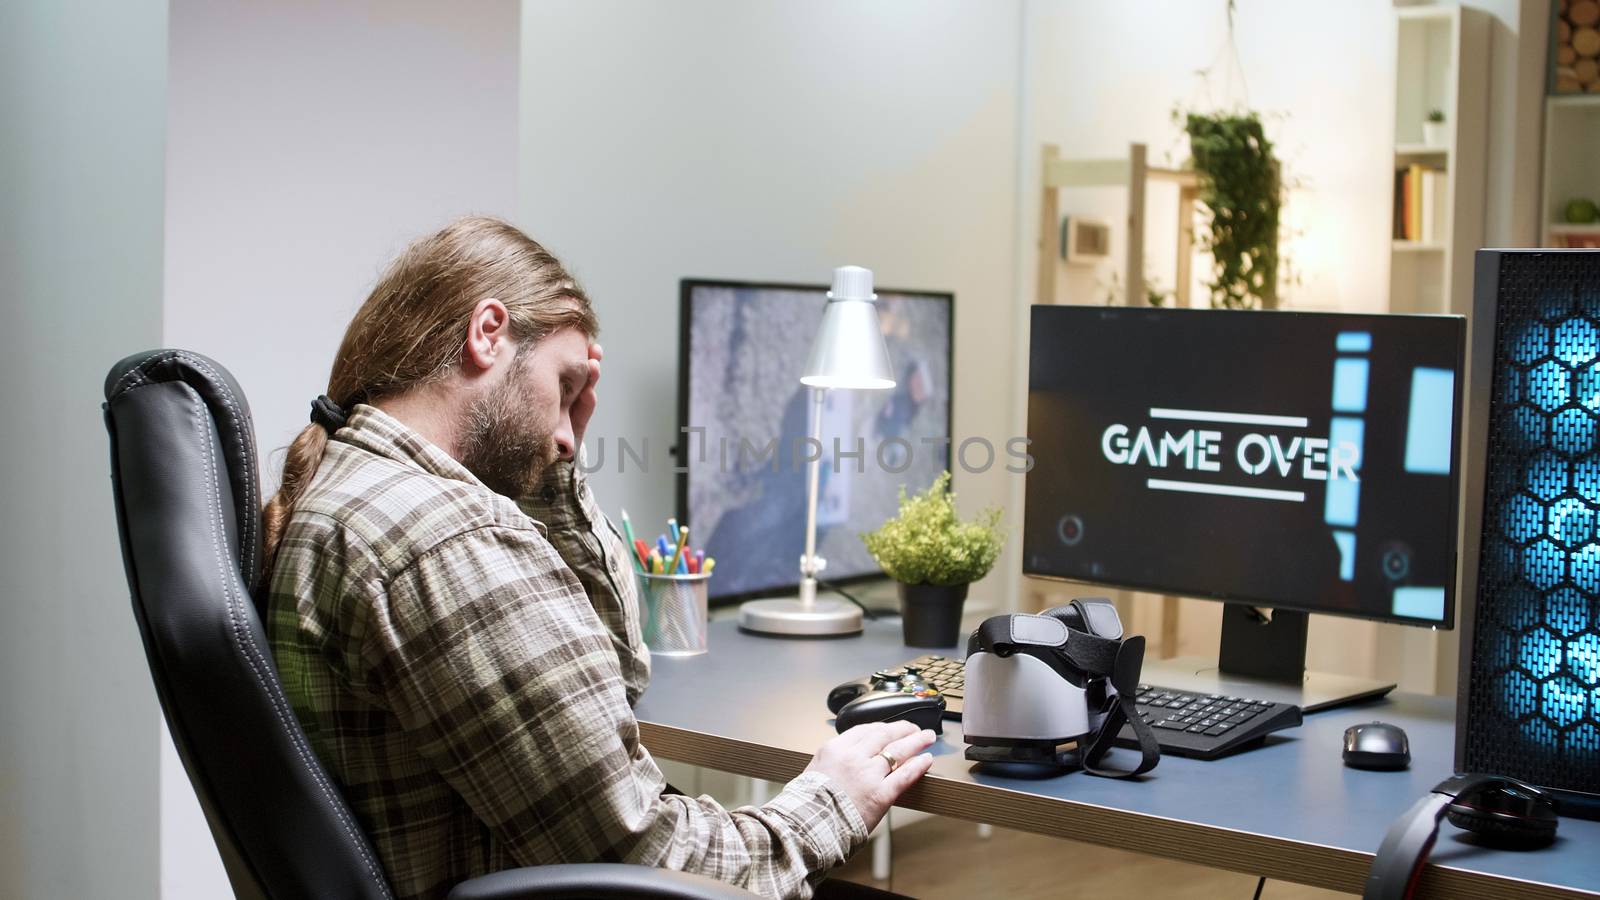 Game over for man sitting on gaming chair using vr headset by DCStudio